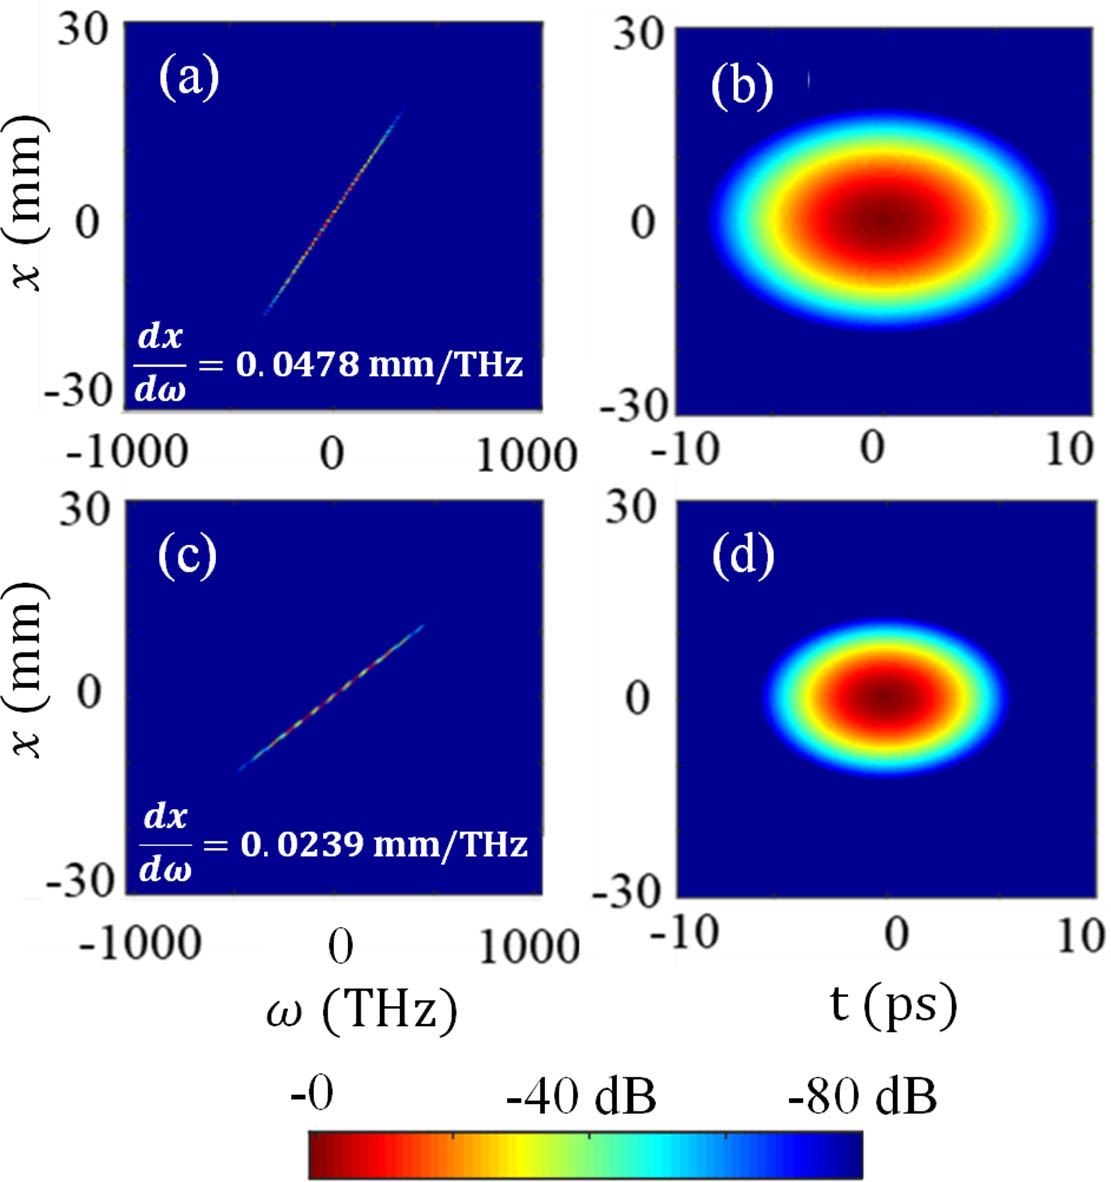 (a) Spatial-spectral and (b) spatiotemporal intensity profiles of the 1ω laser in the Fourier-plane; (c) spatial-spectral and (d) spatiotemporal intensity profiles of the 2ω laser in the Fourier-plane calculated under the assumption of perfect phase matching.